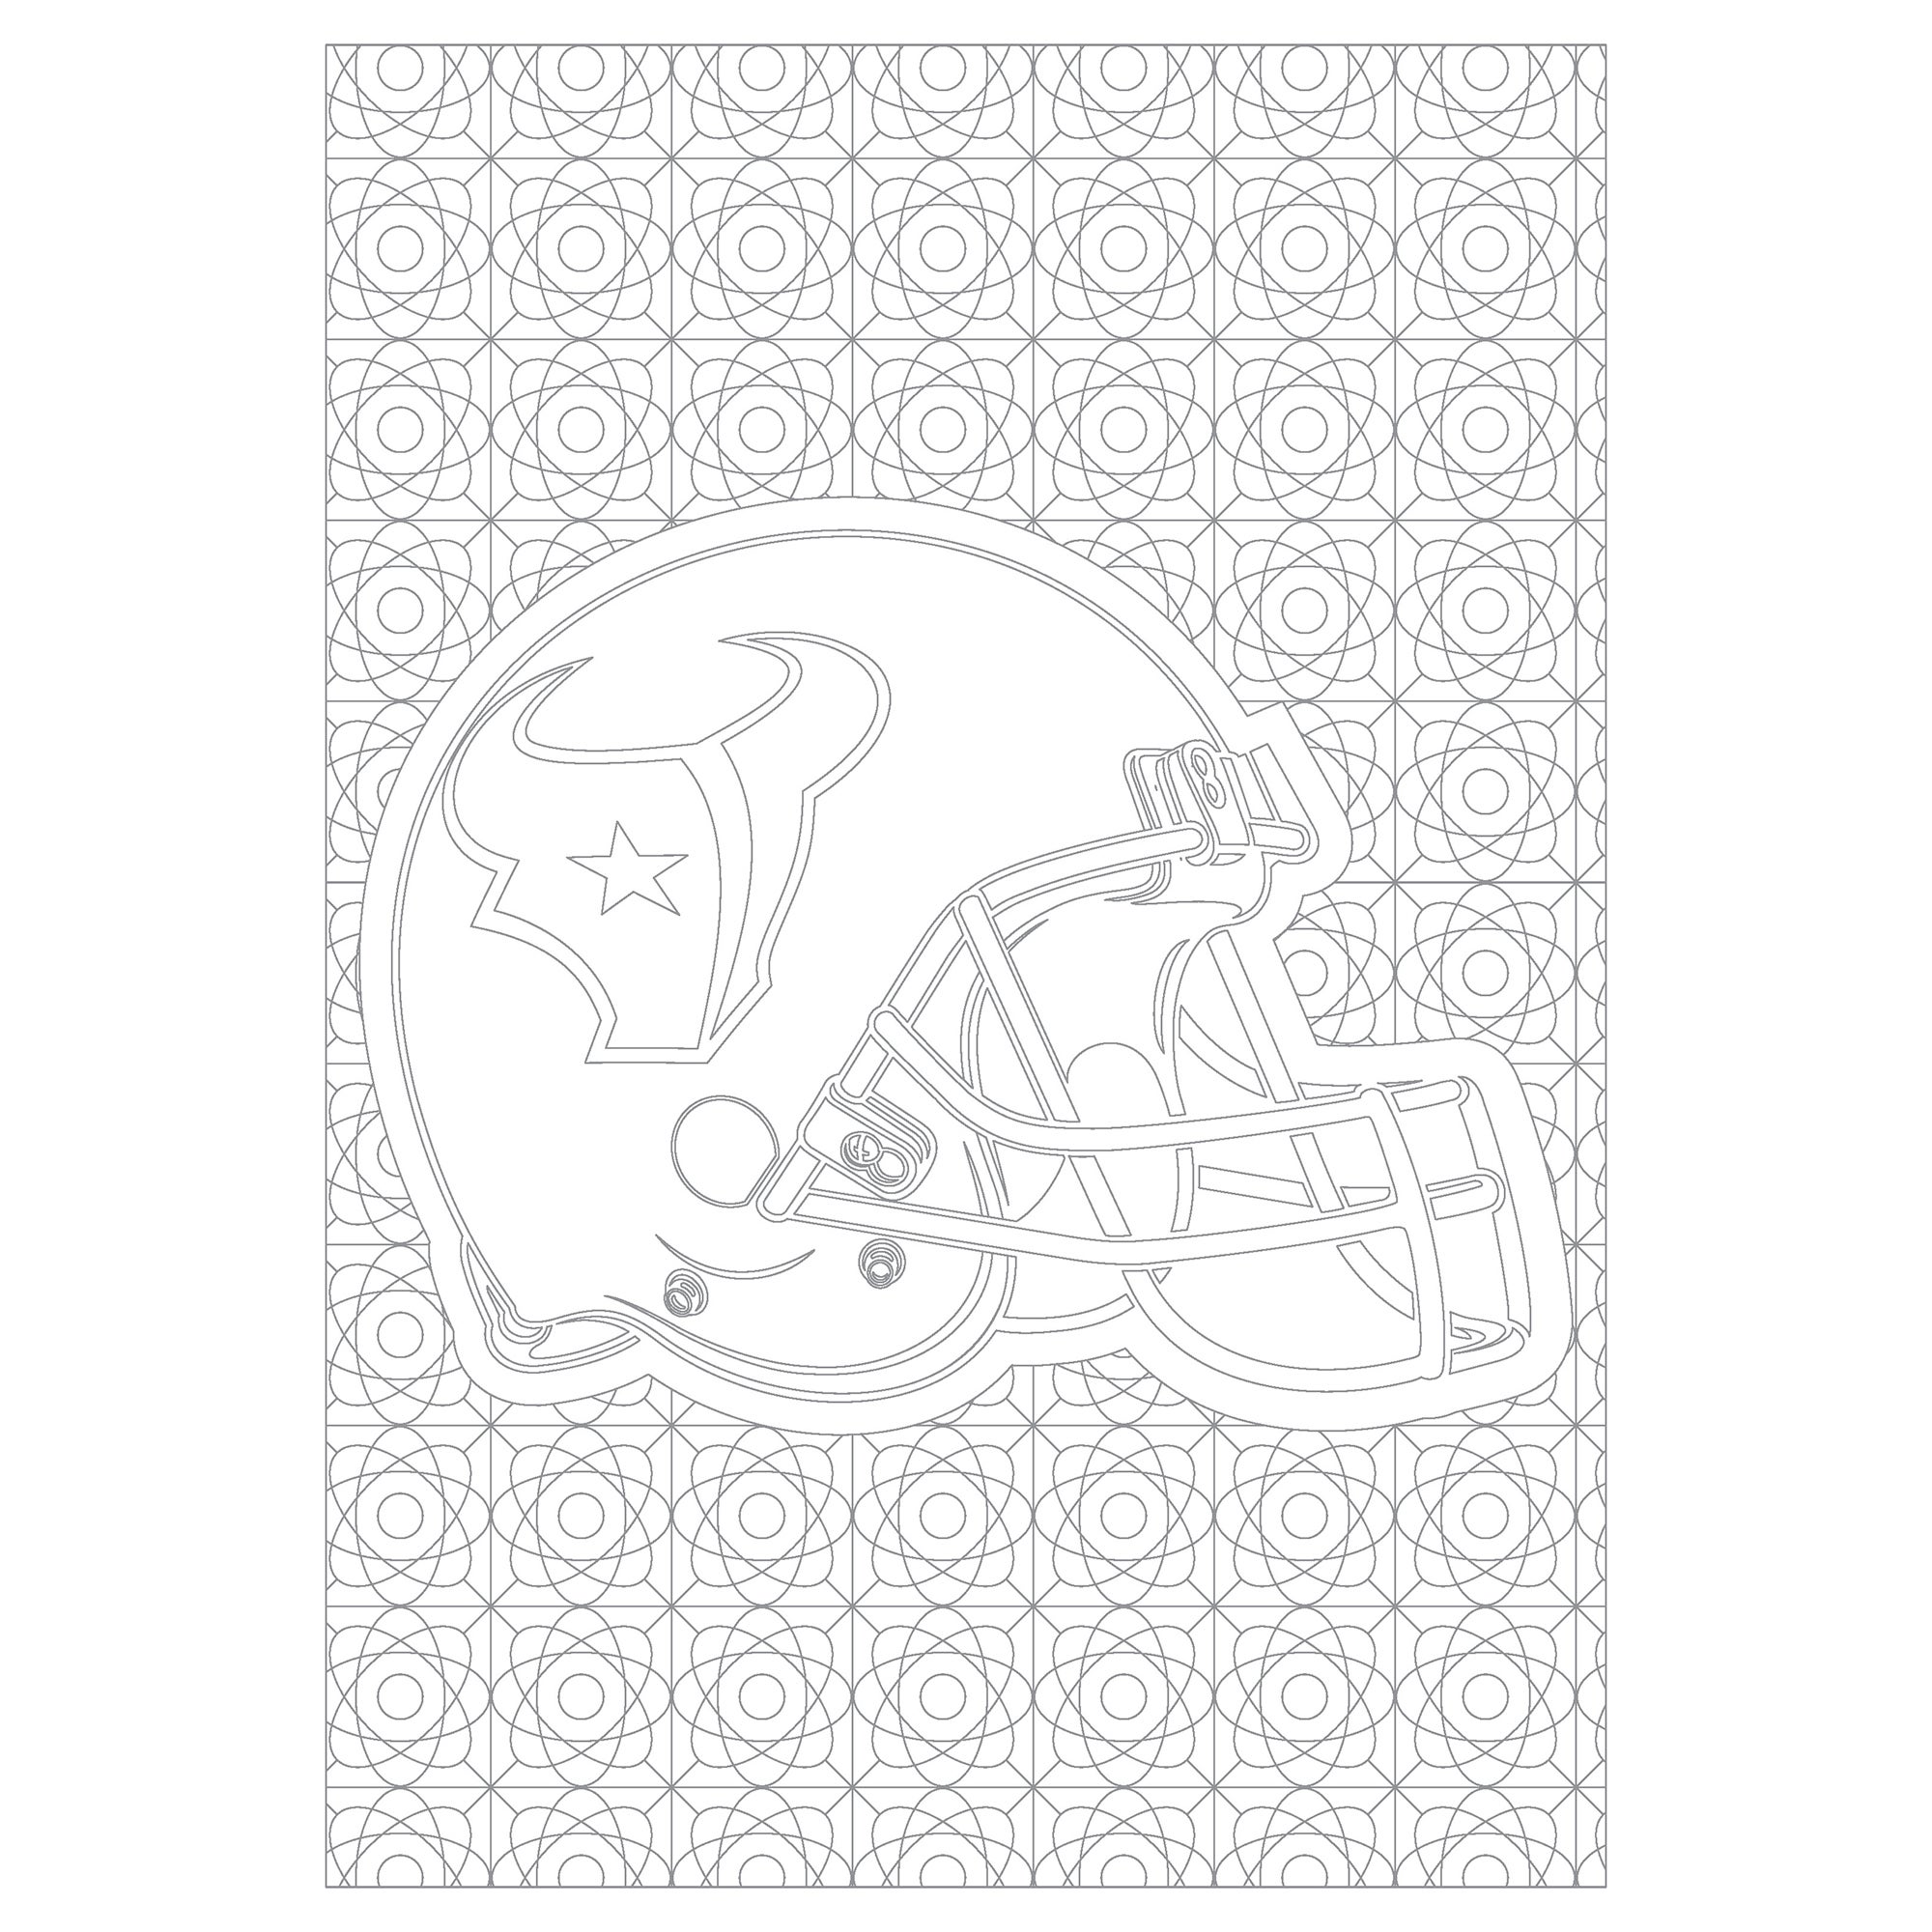 Shop Houston Texans NFL Adult Coloring Book - Overstock - 18012014